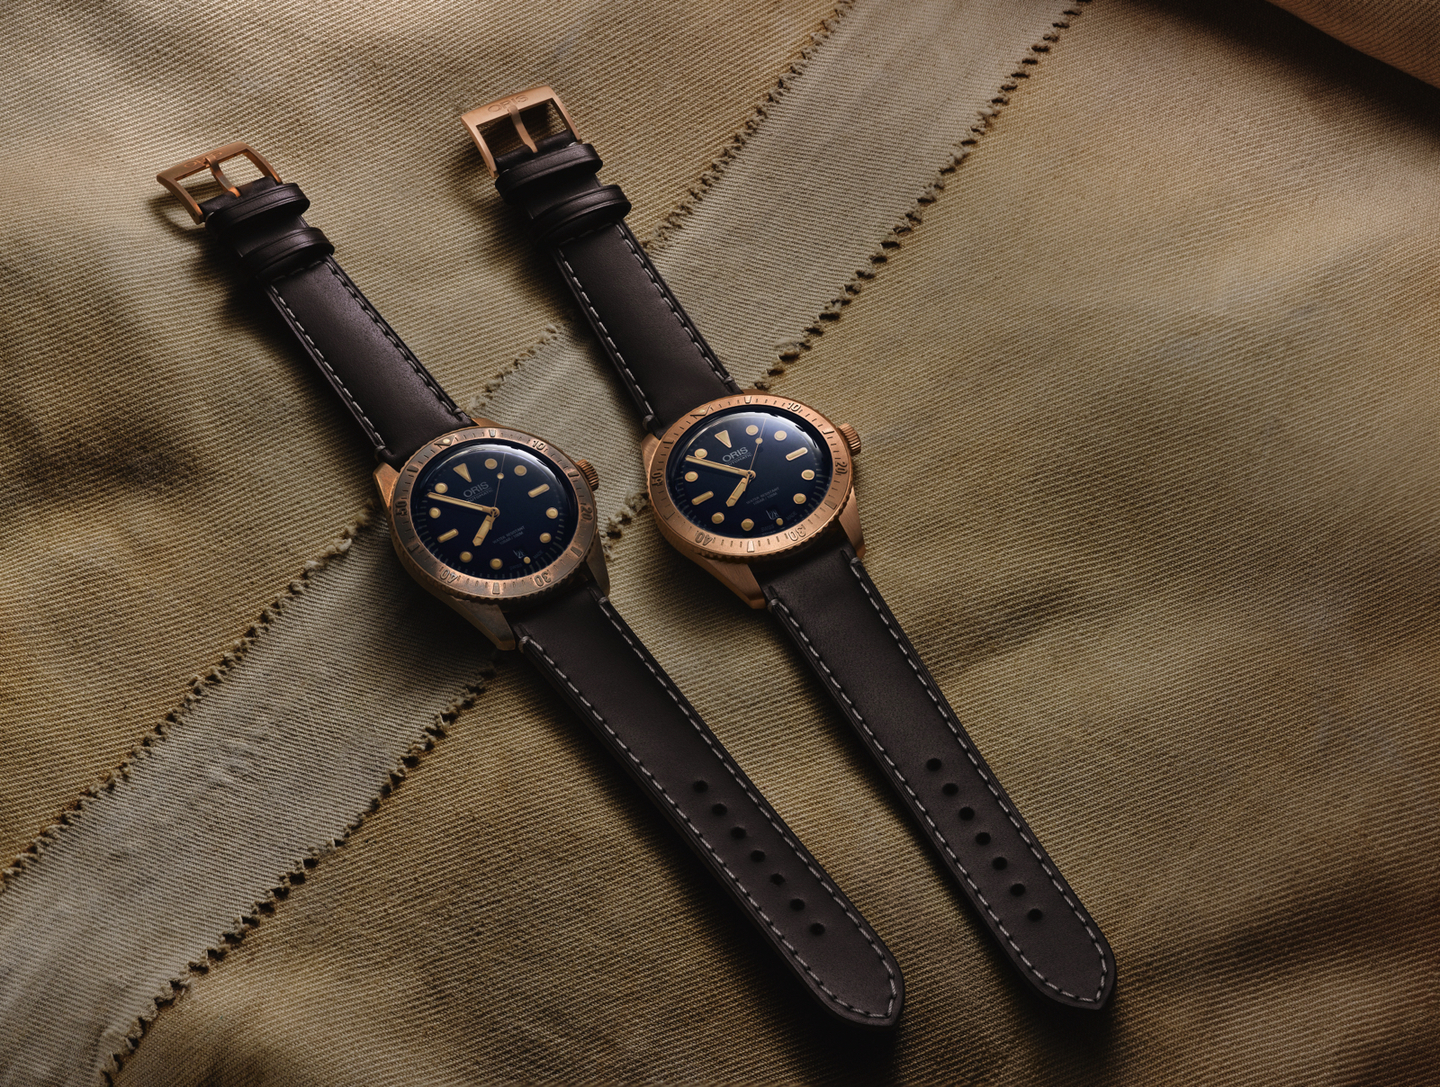 Introducing the Oris Carl Brashear Limited Edition Diver’s Watch